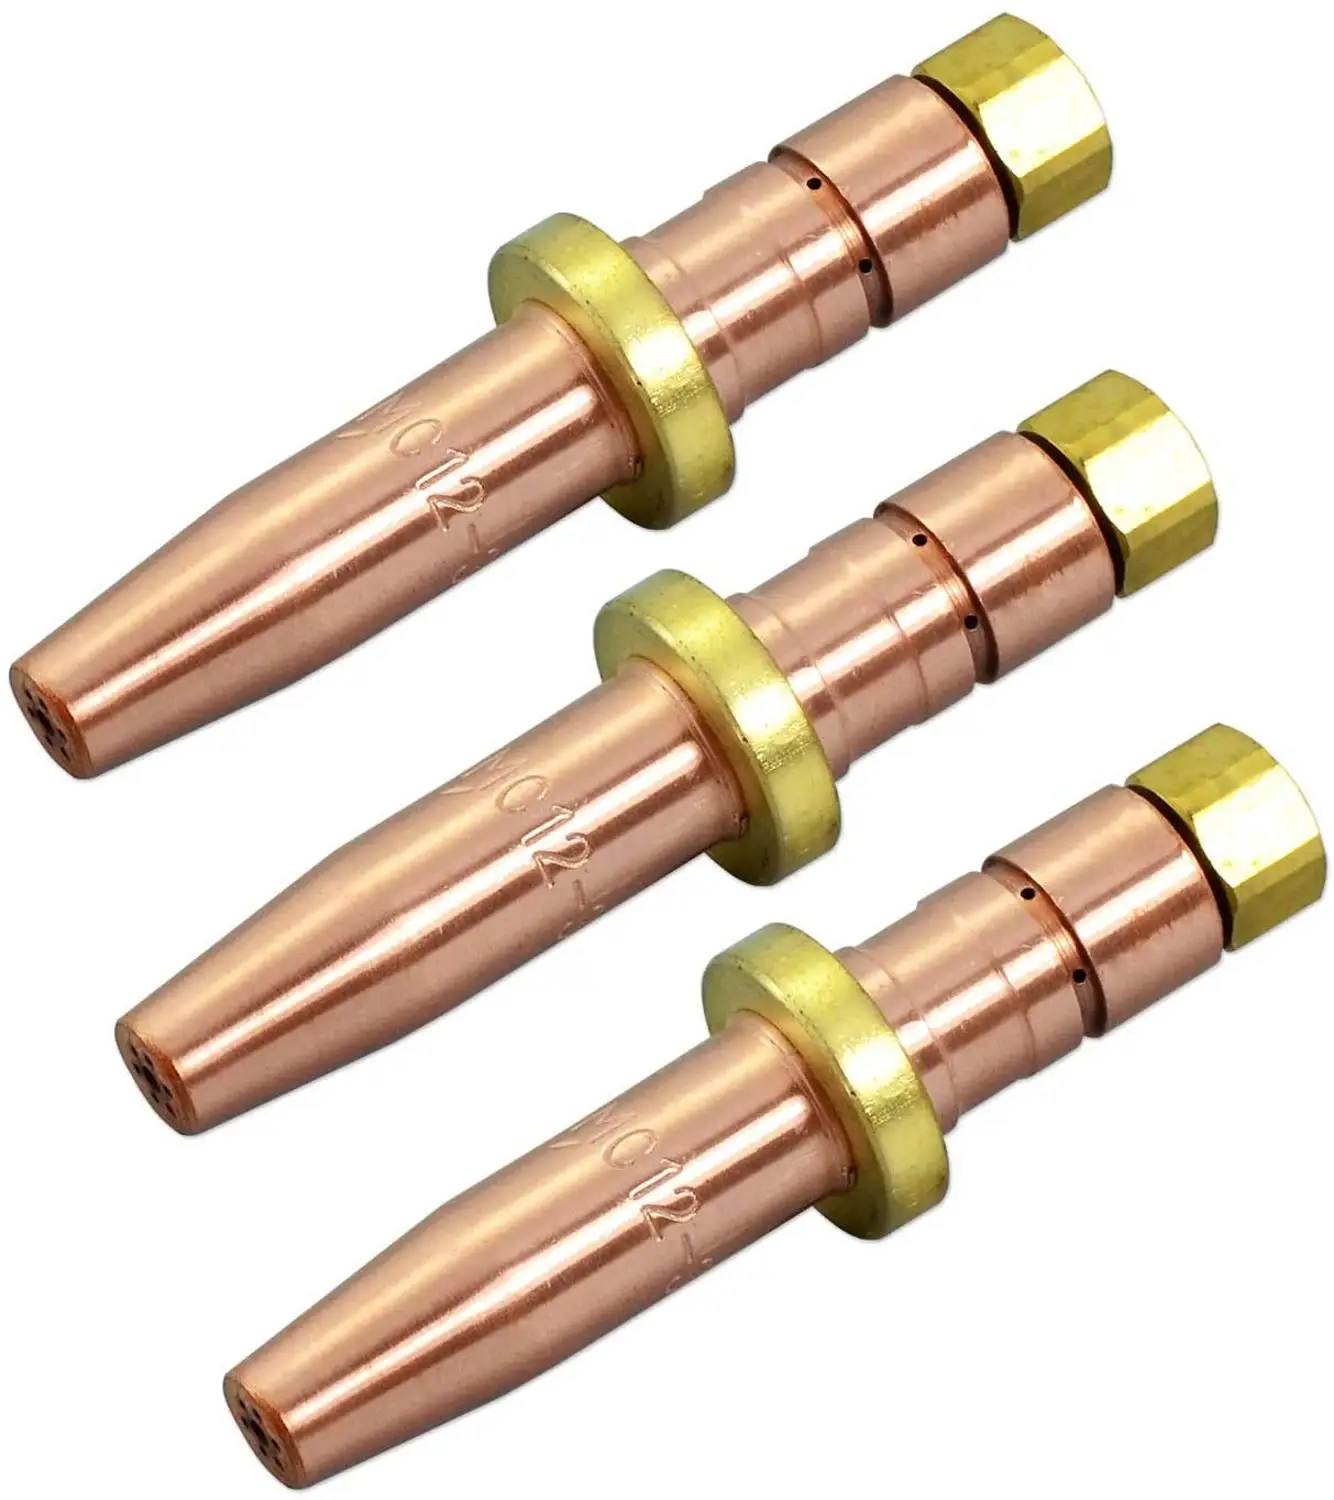 

MC12-3 Acetylene Cutting Tip for Smith Torch 3PK …